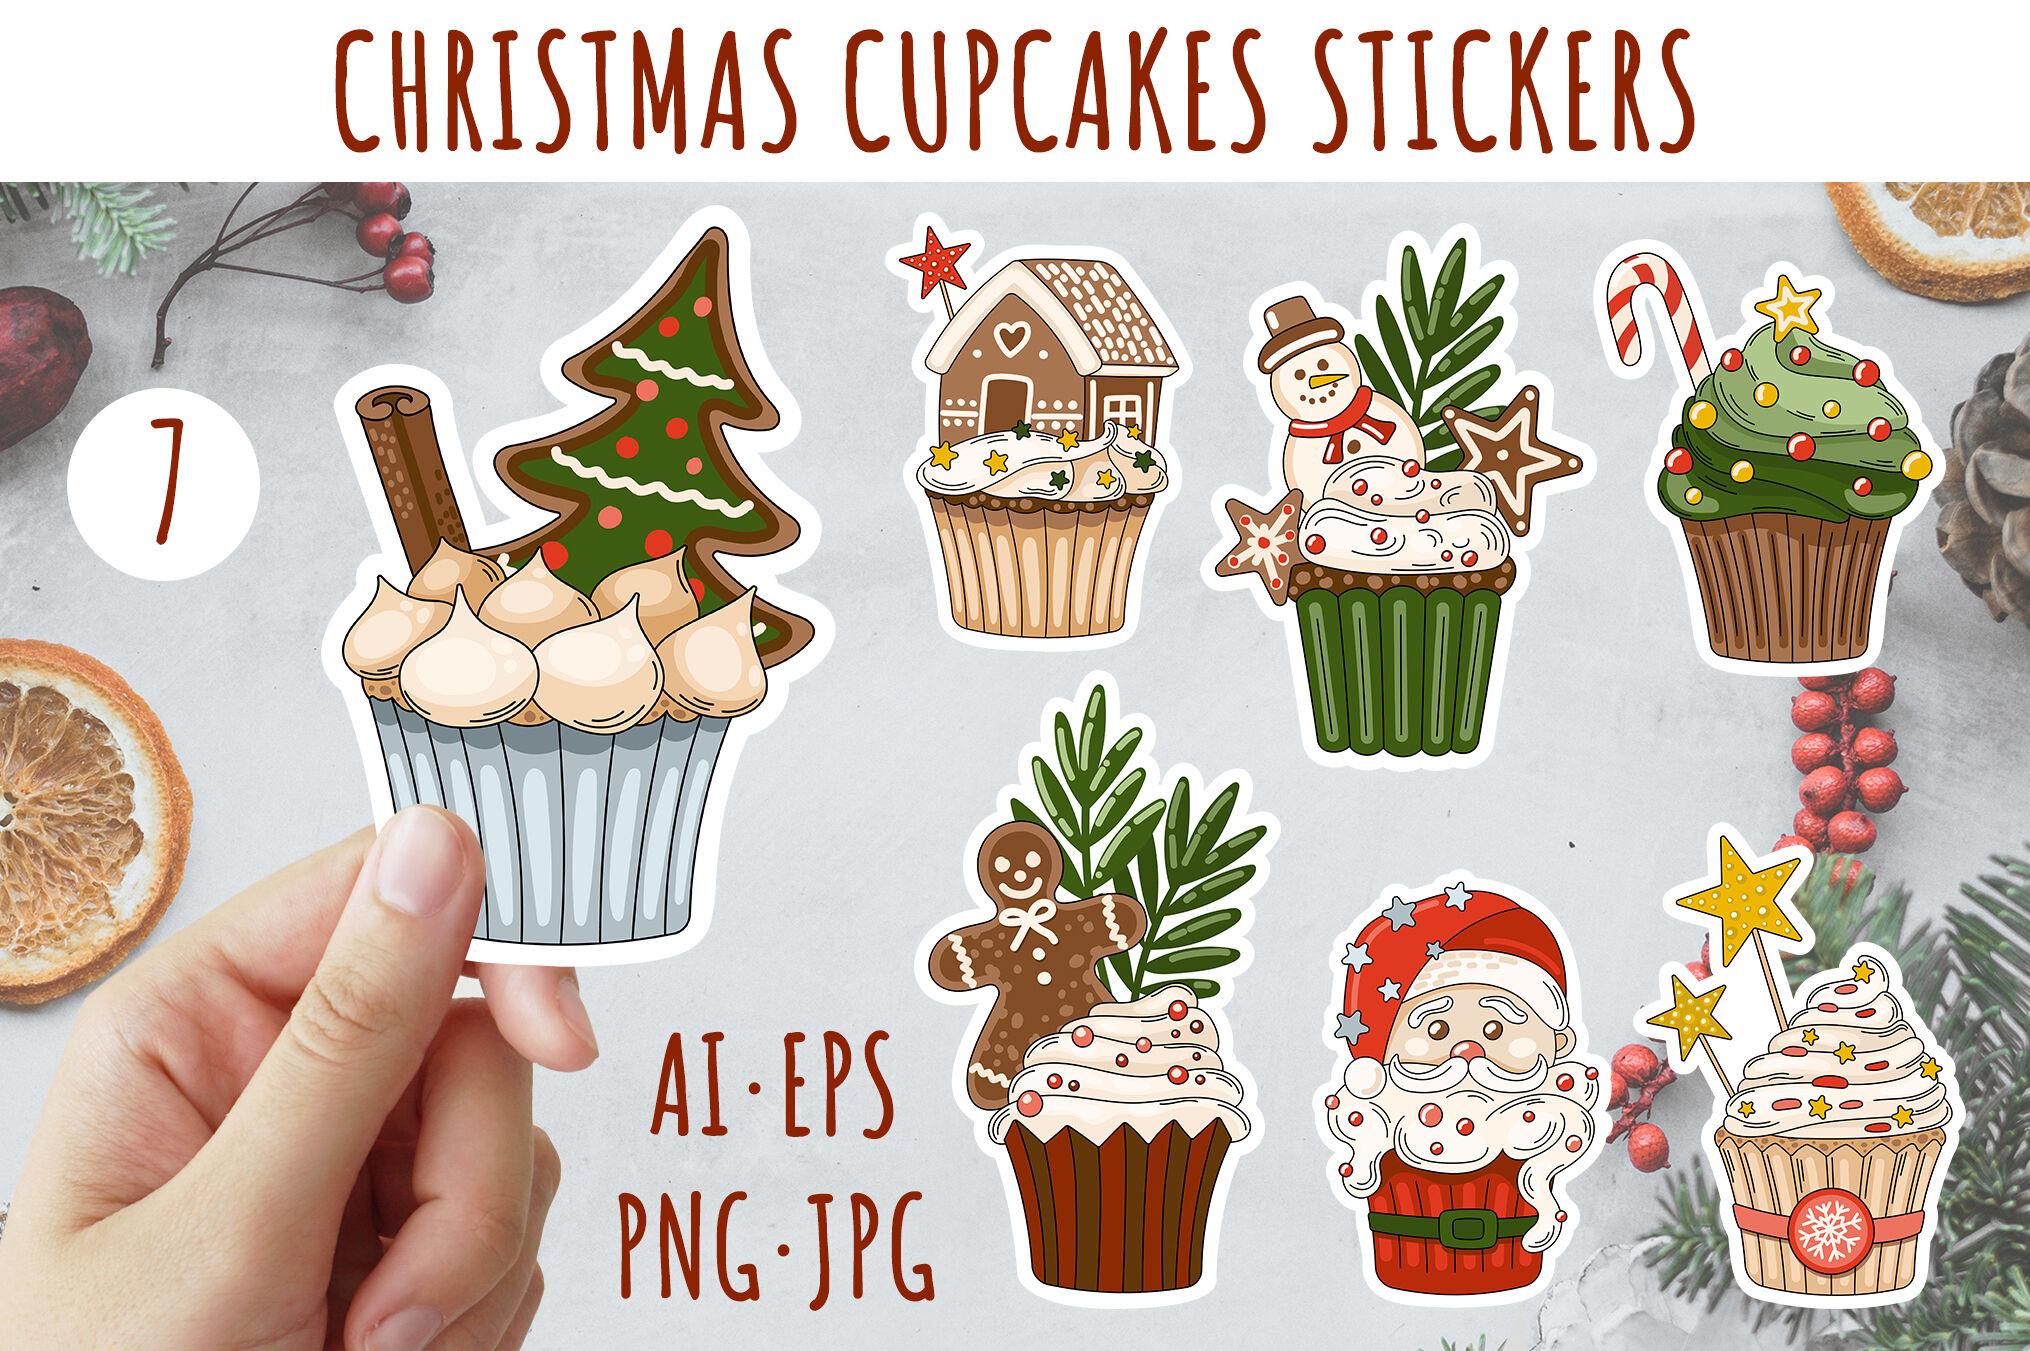 Christmas cupcake stickers, Christmas sweets stickers By ArtFM